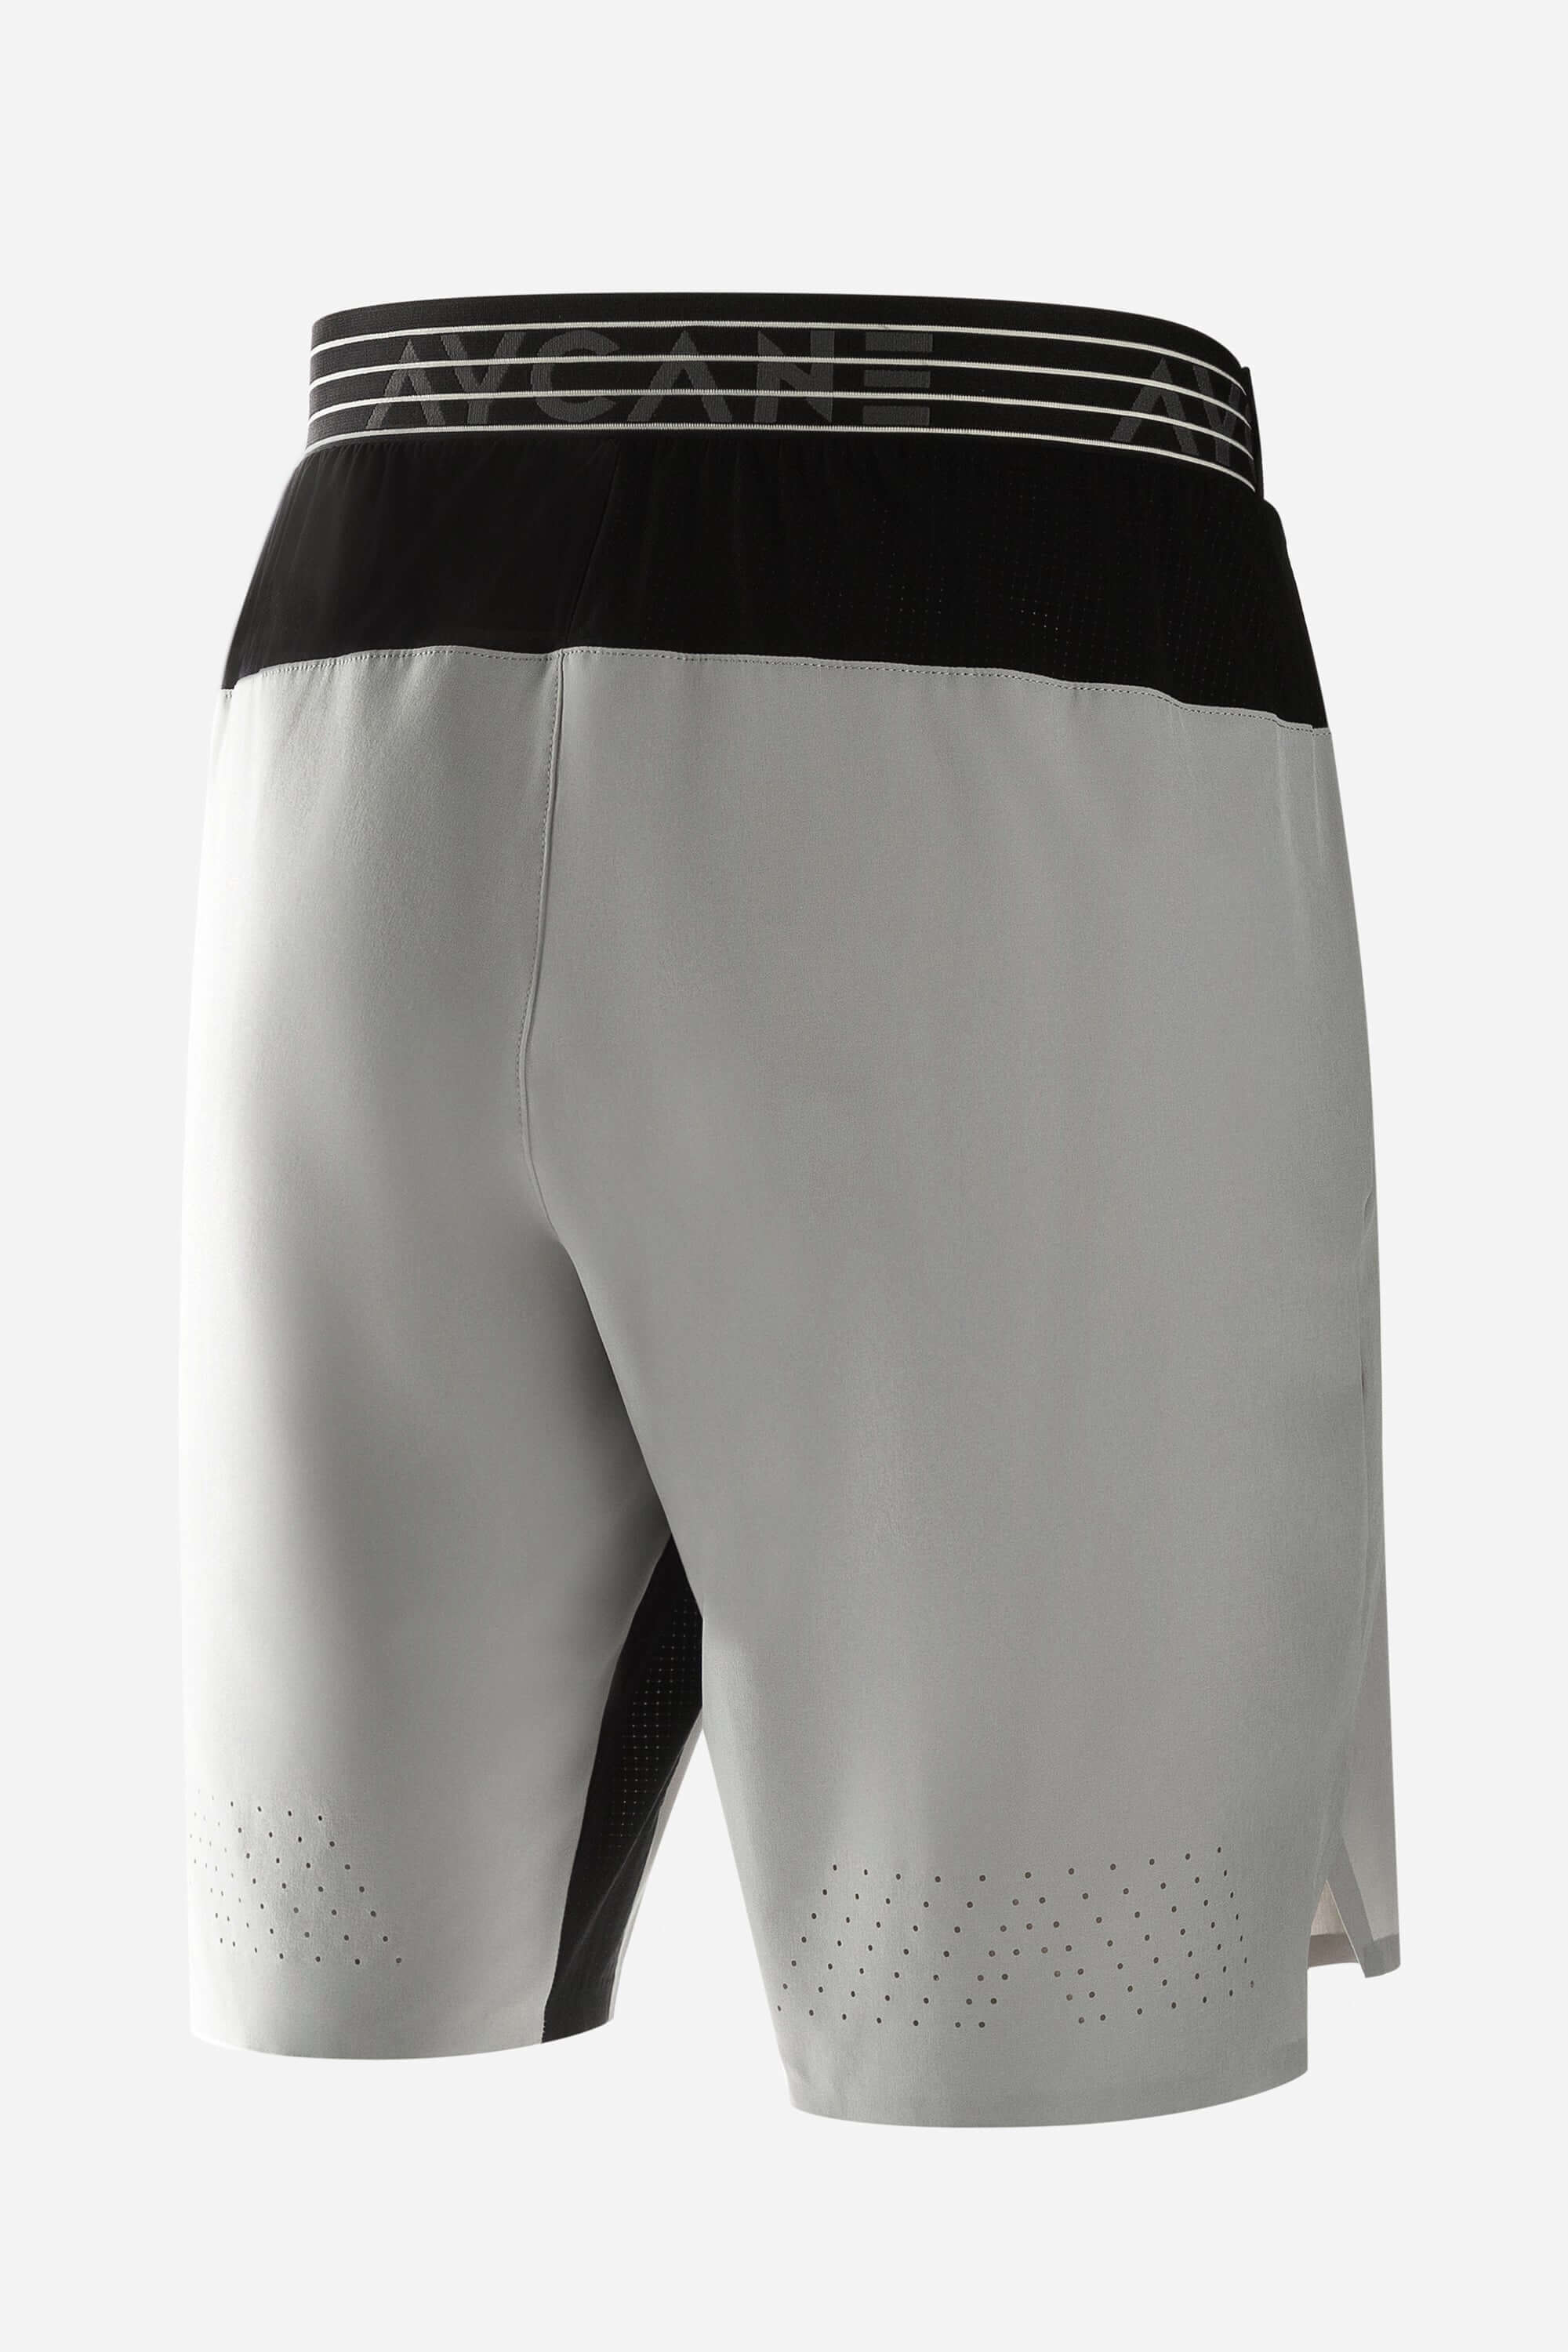 Grey workout shorts with side zips and laser cut holes